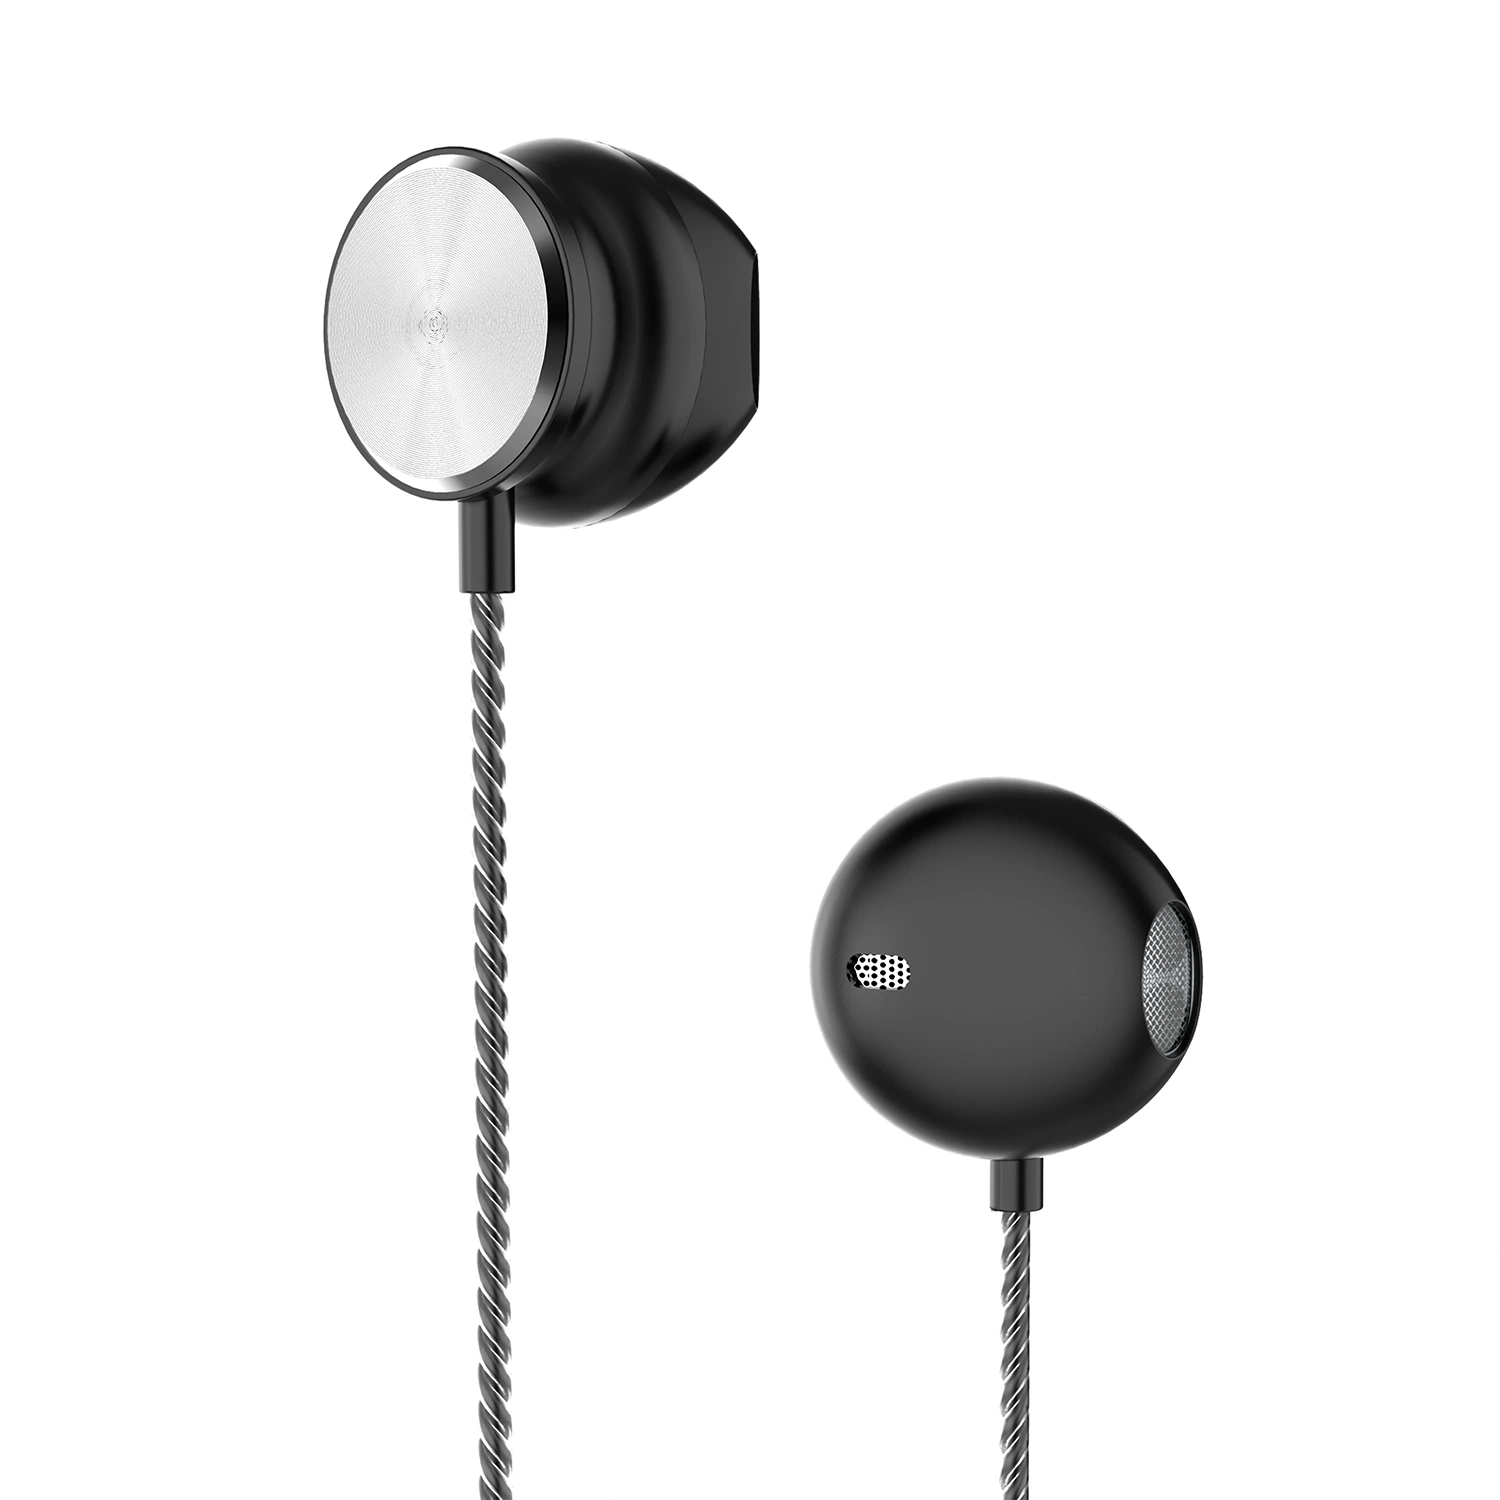 Wired Earphone DC 3.5mm Earphone with a Microphone for Mobile Phone